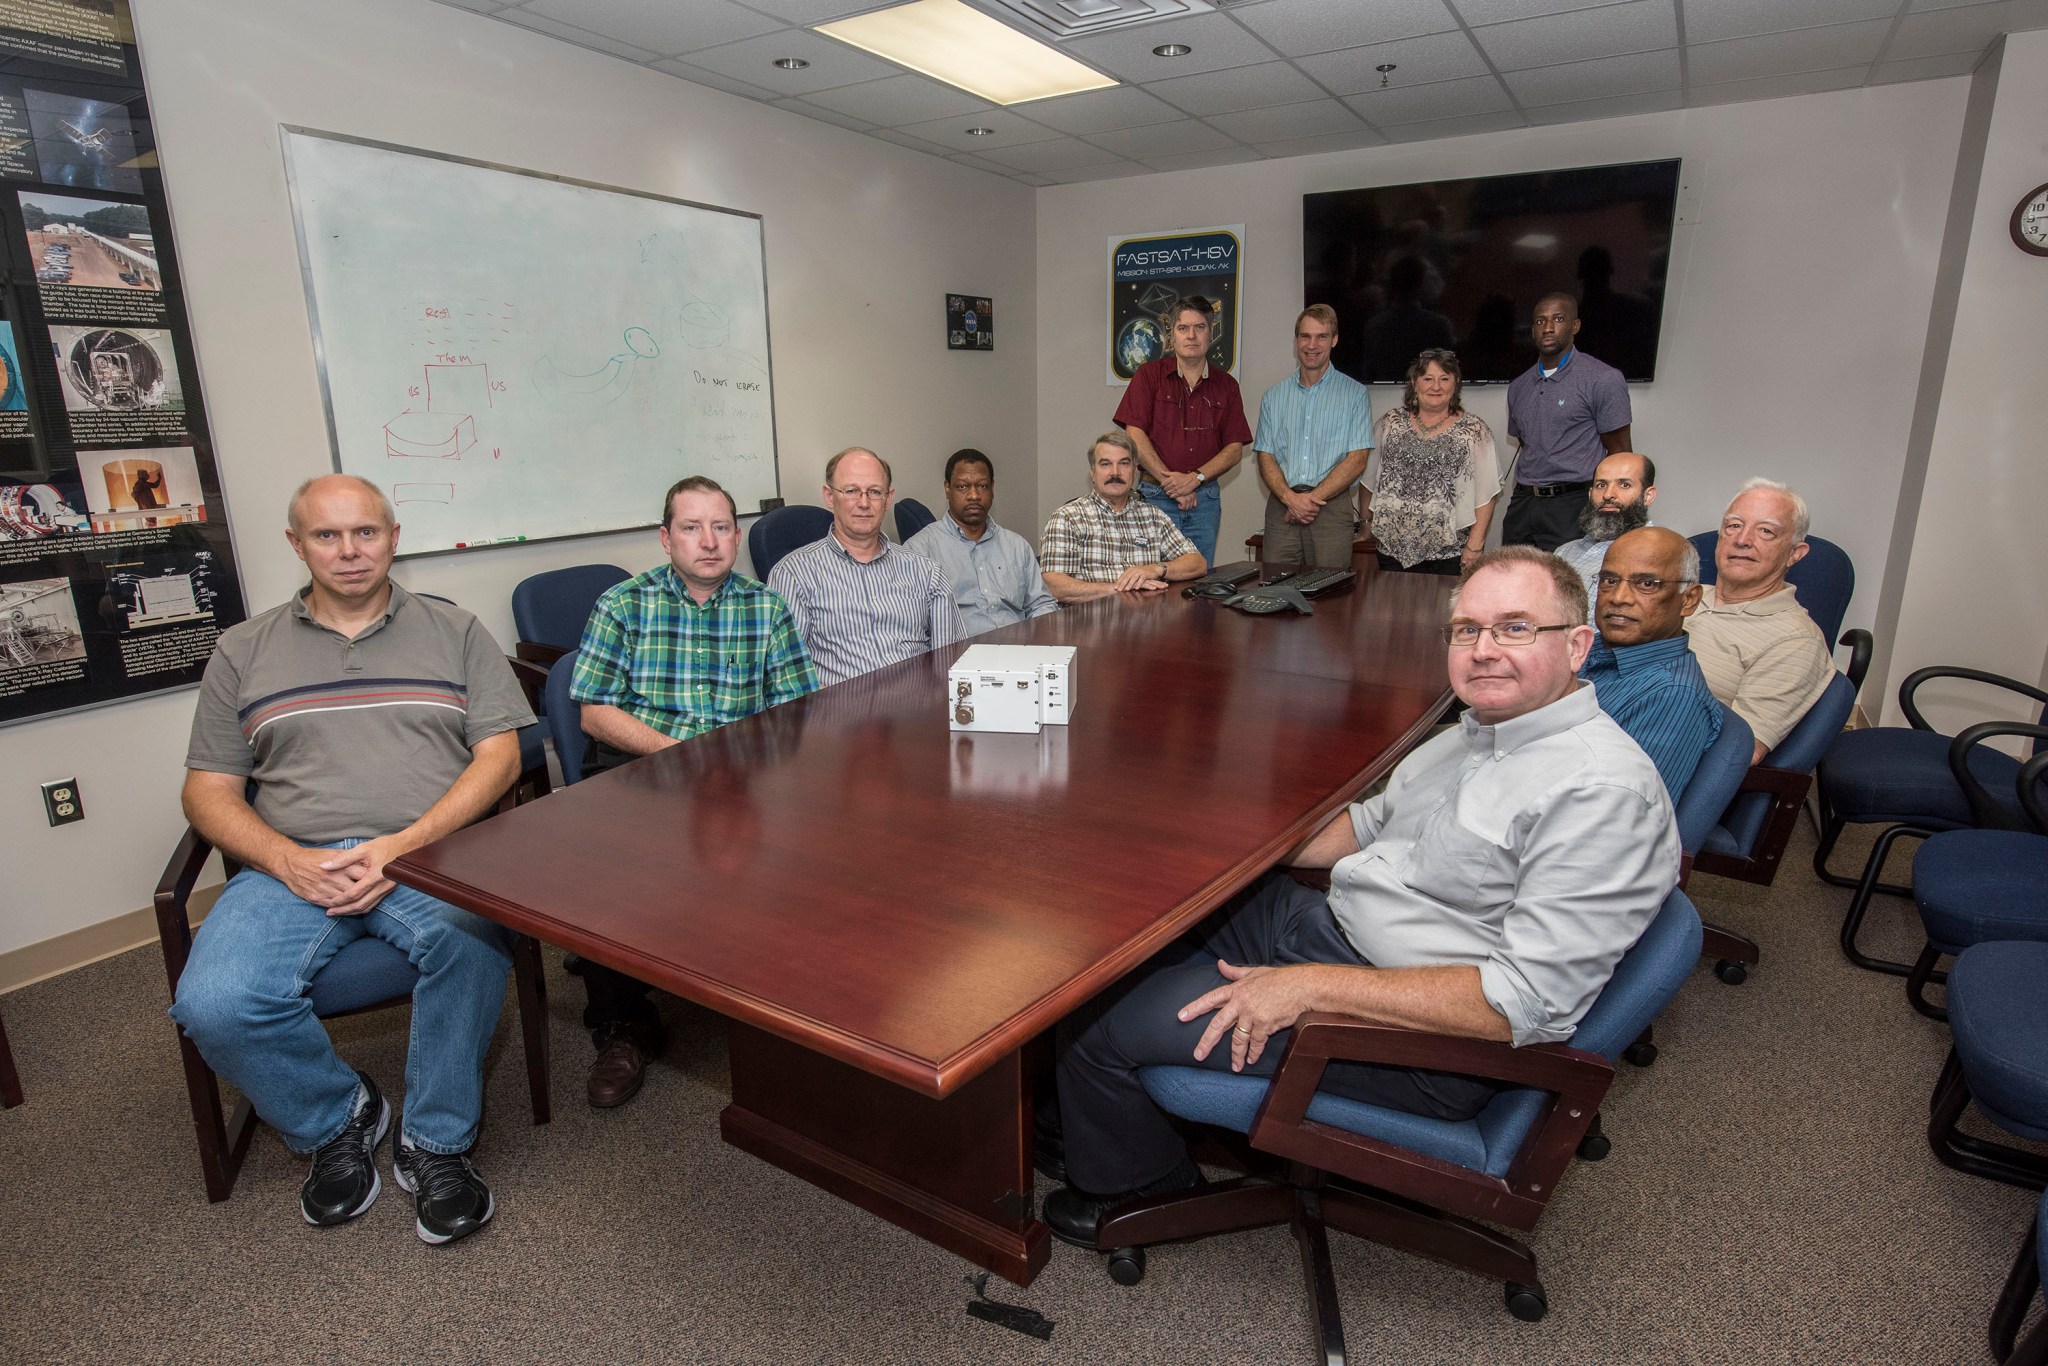 The team of scientists and engineers that designed and built the Fast Neutron Spectrometer at Marshall Space Flight Center